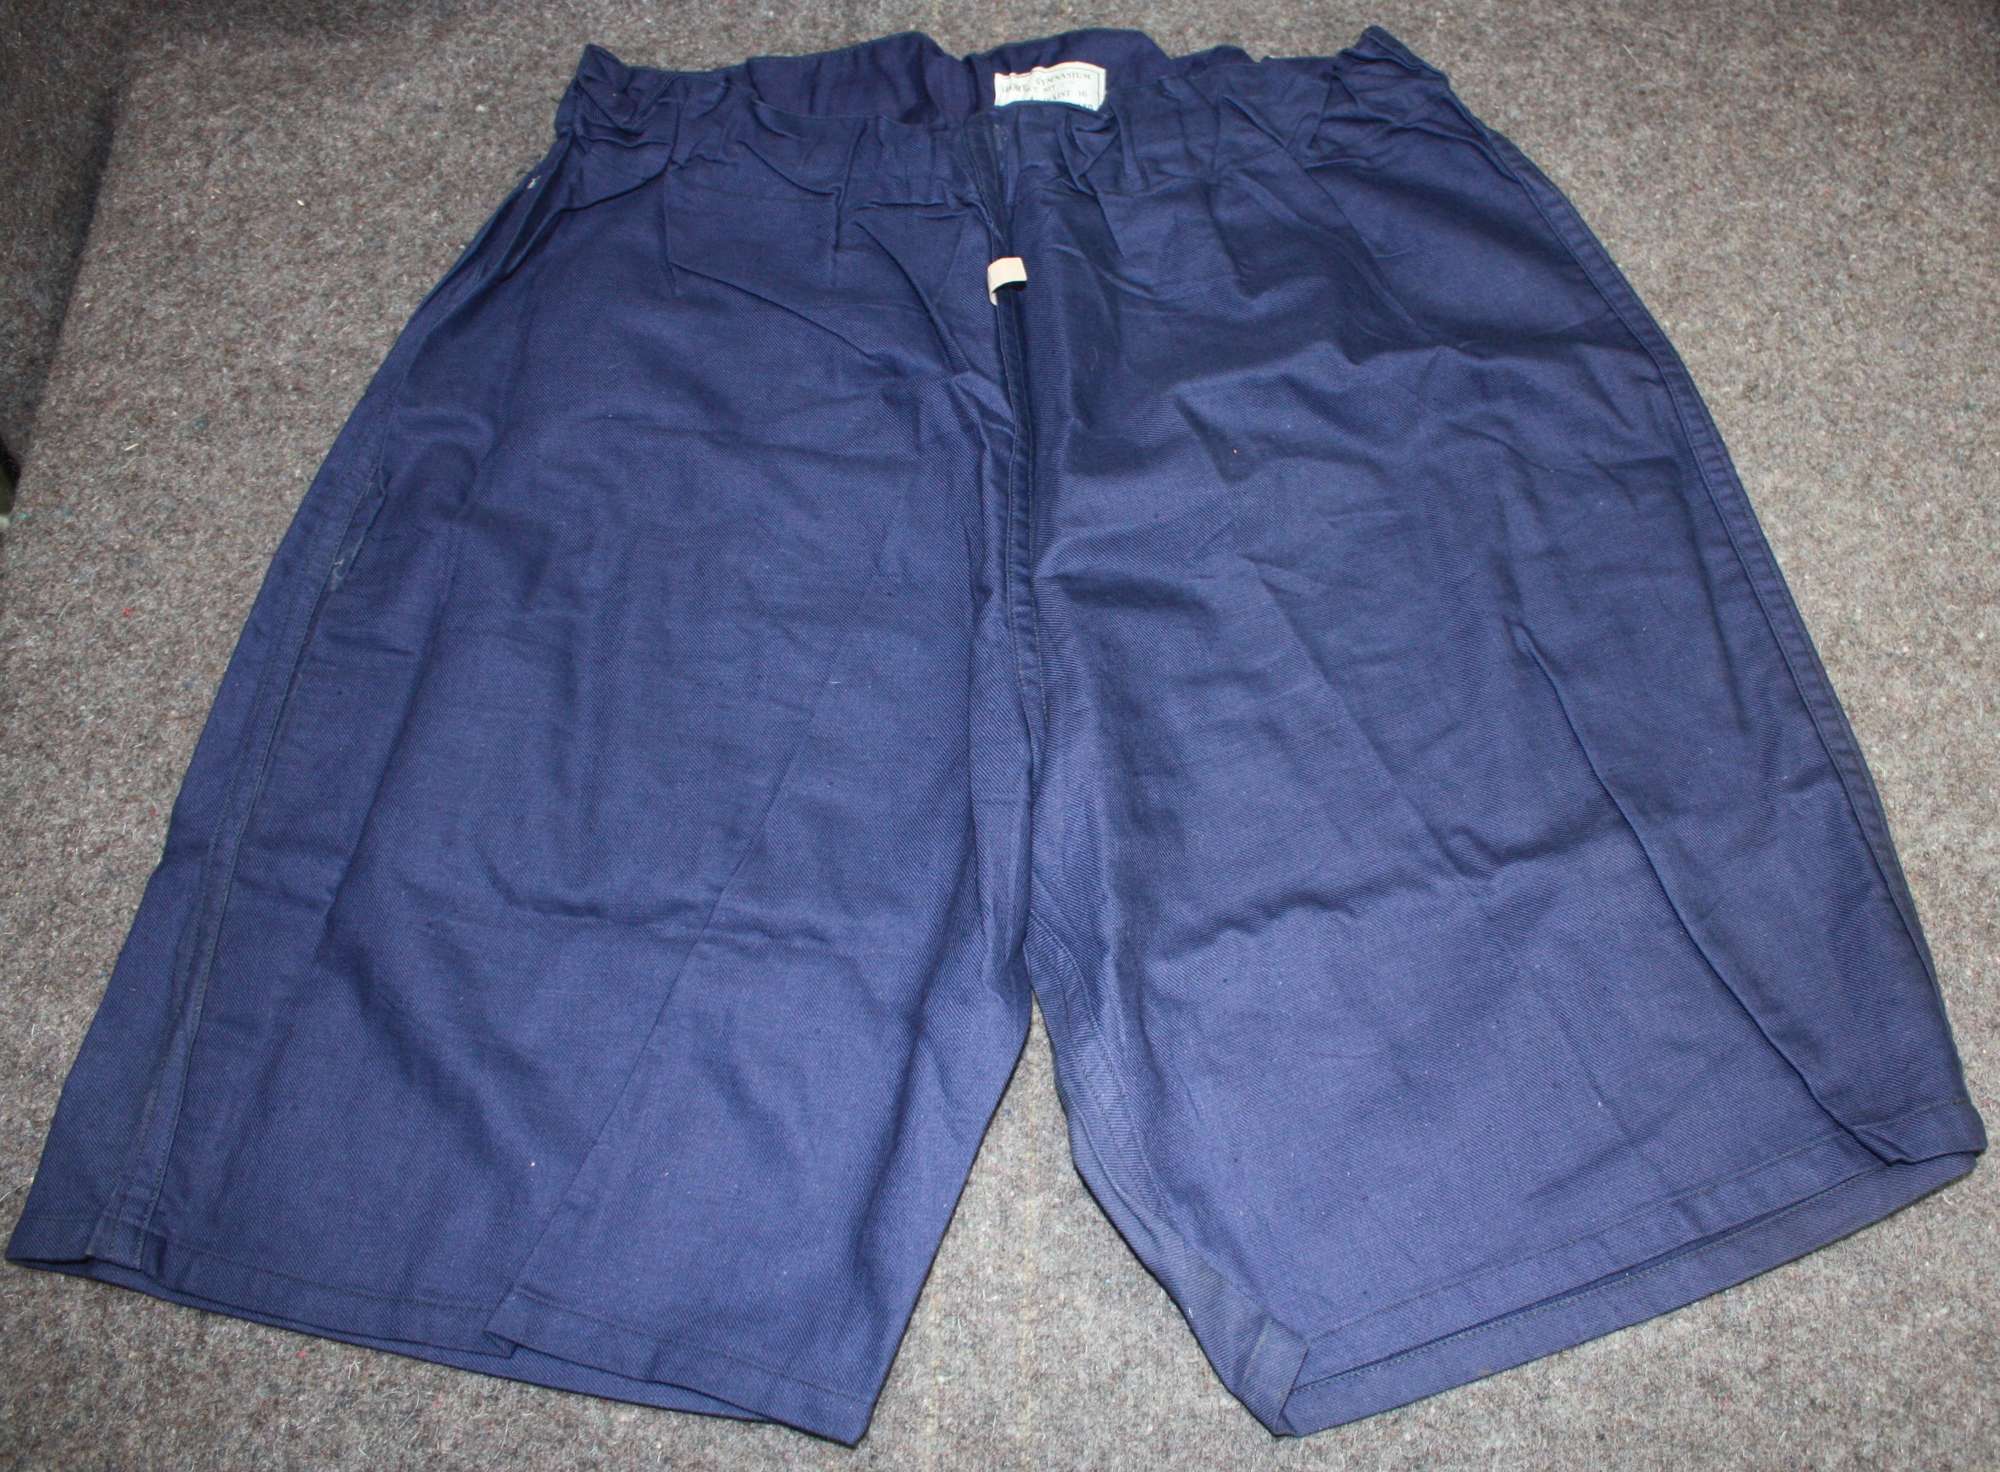 A GODO SIZE PAIR OF 1941 DATED PT SHORTS